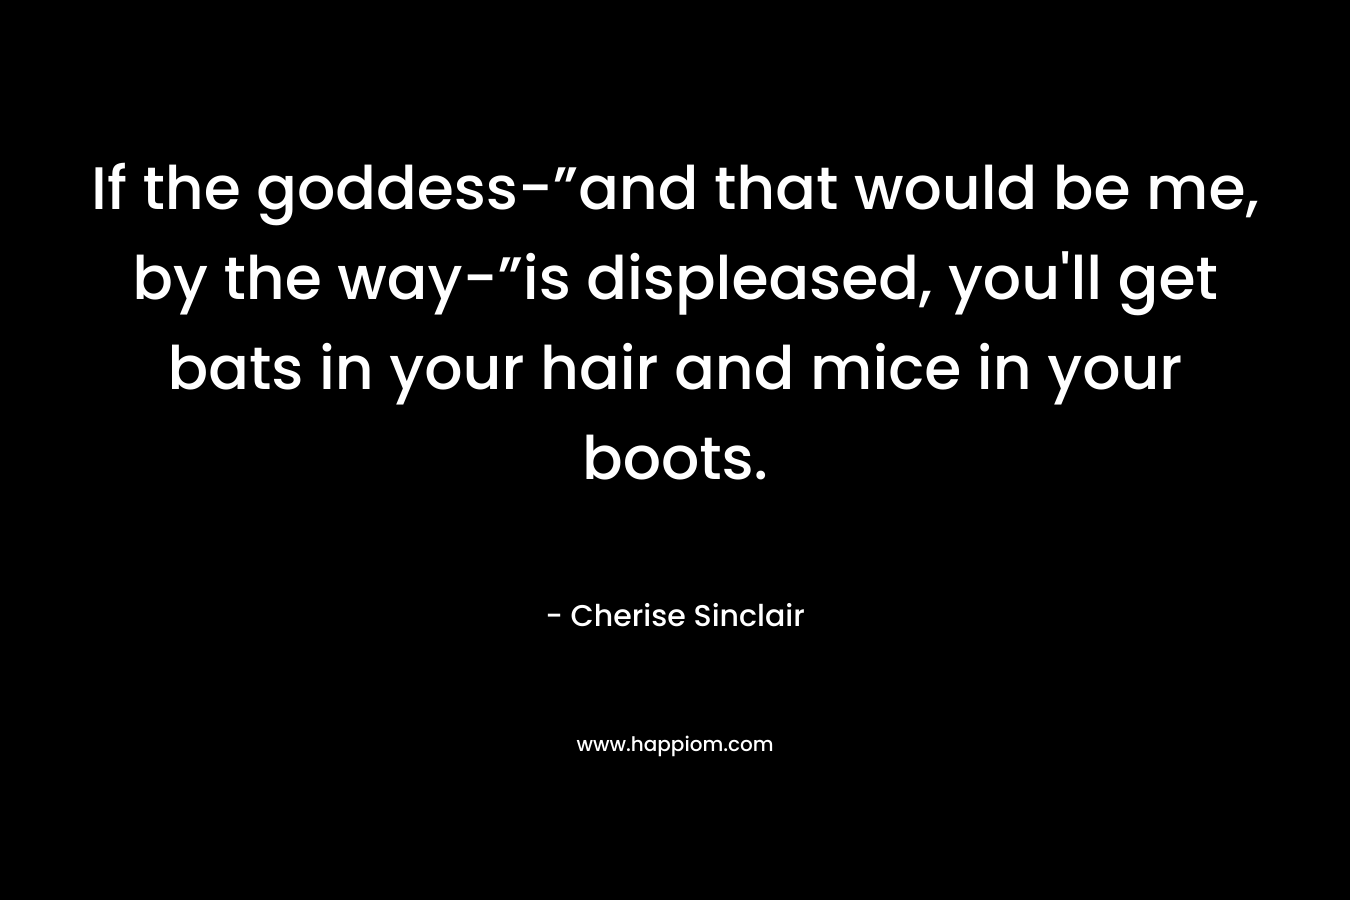 If the goddess-”and that would be me, by the way-”is displeased, you’ll get bats in your hair and mice in your boots. – Cherise Sinclair